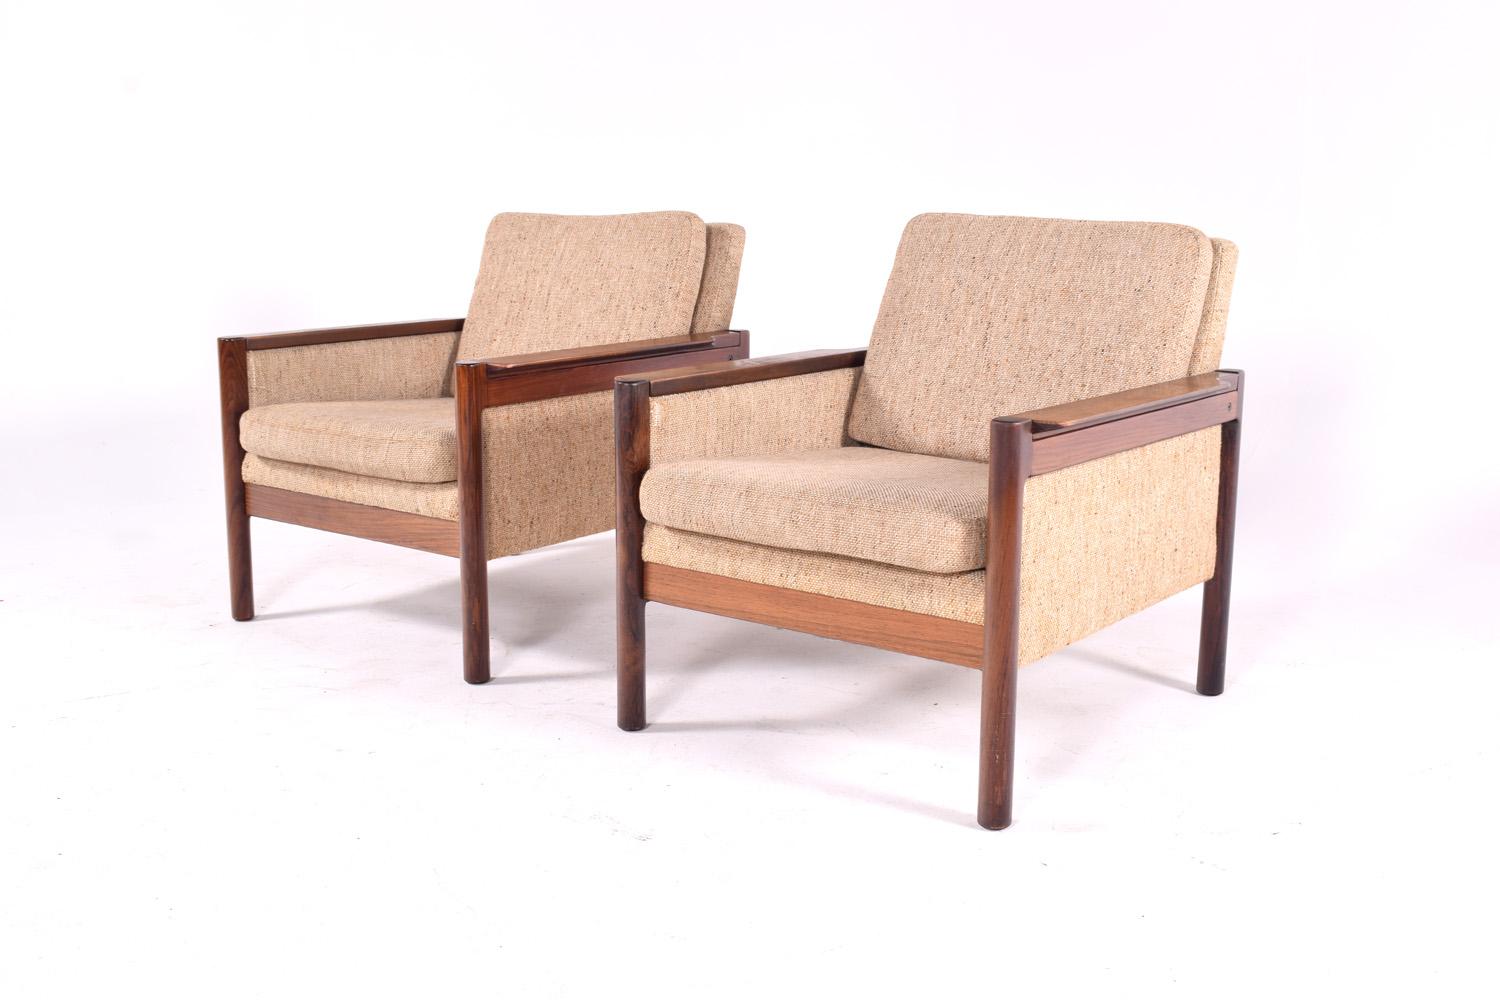 Designed by Illum Wikkelso in 1959 the Capella series was produced by Danish furniture maker Niels Eilersen A/S from the 1960s.
They are made from solid rosewood frames with interlocking joints on the arms. Each chair compromises of two separate